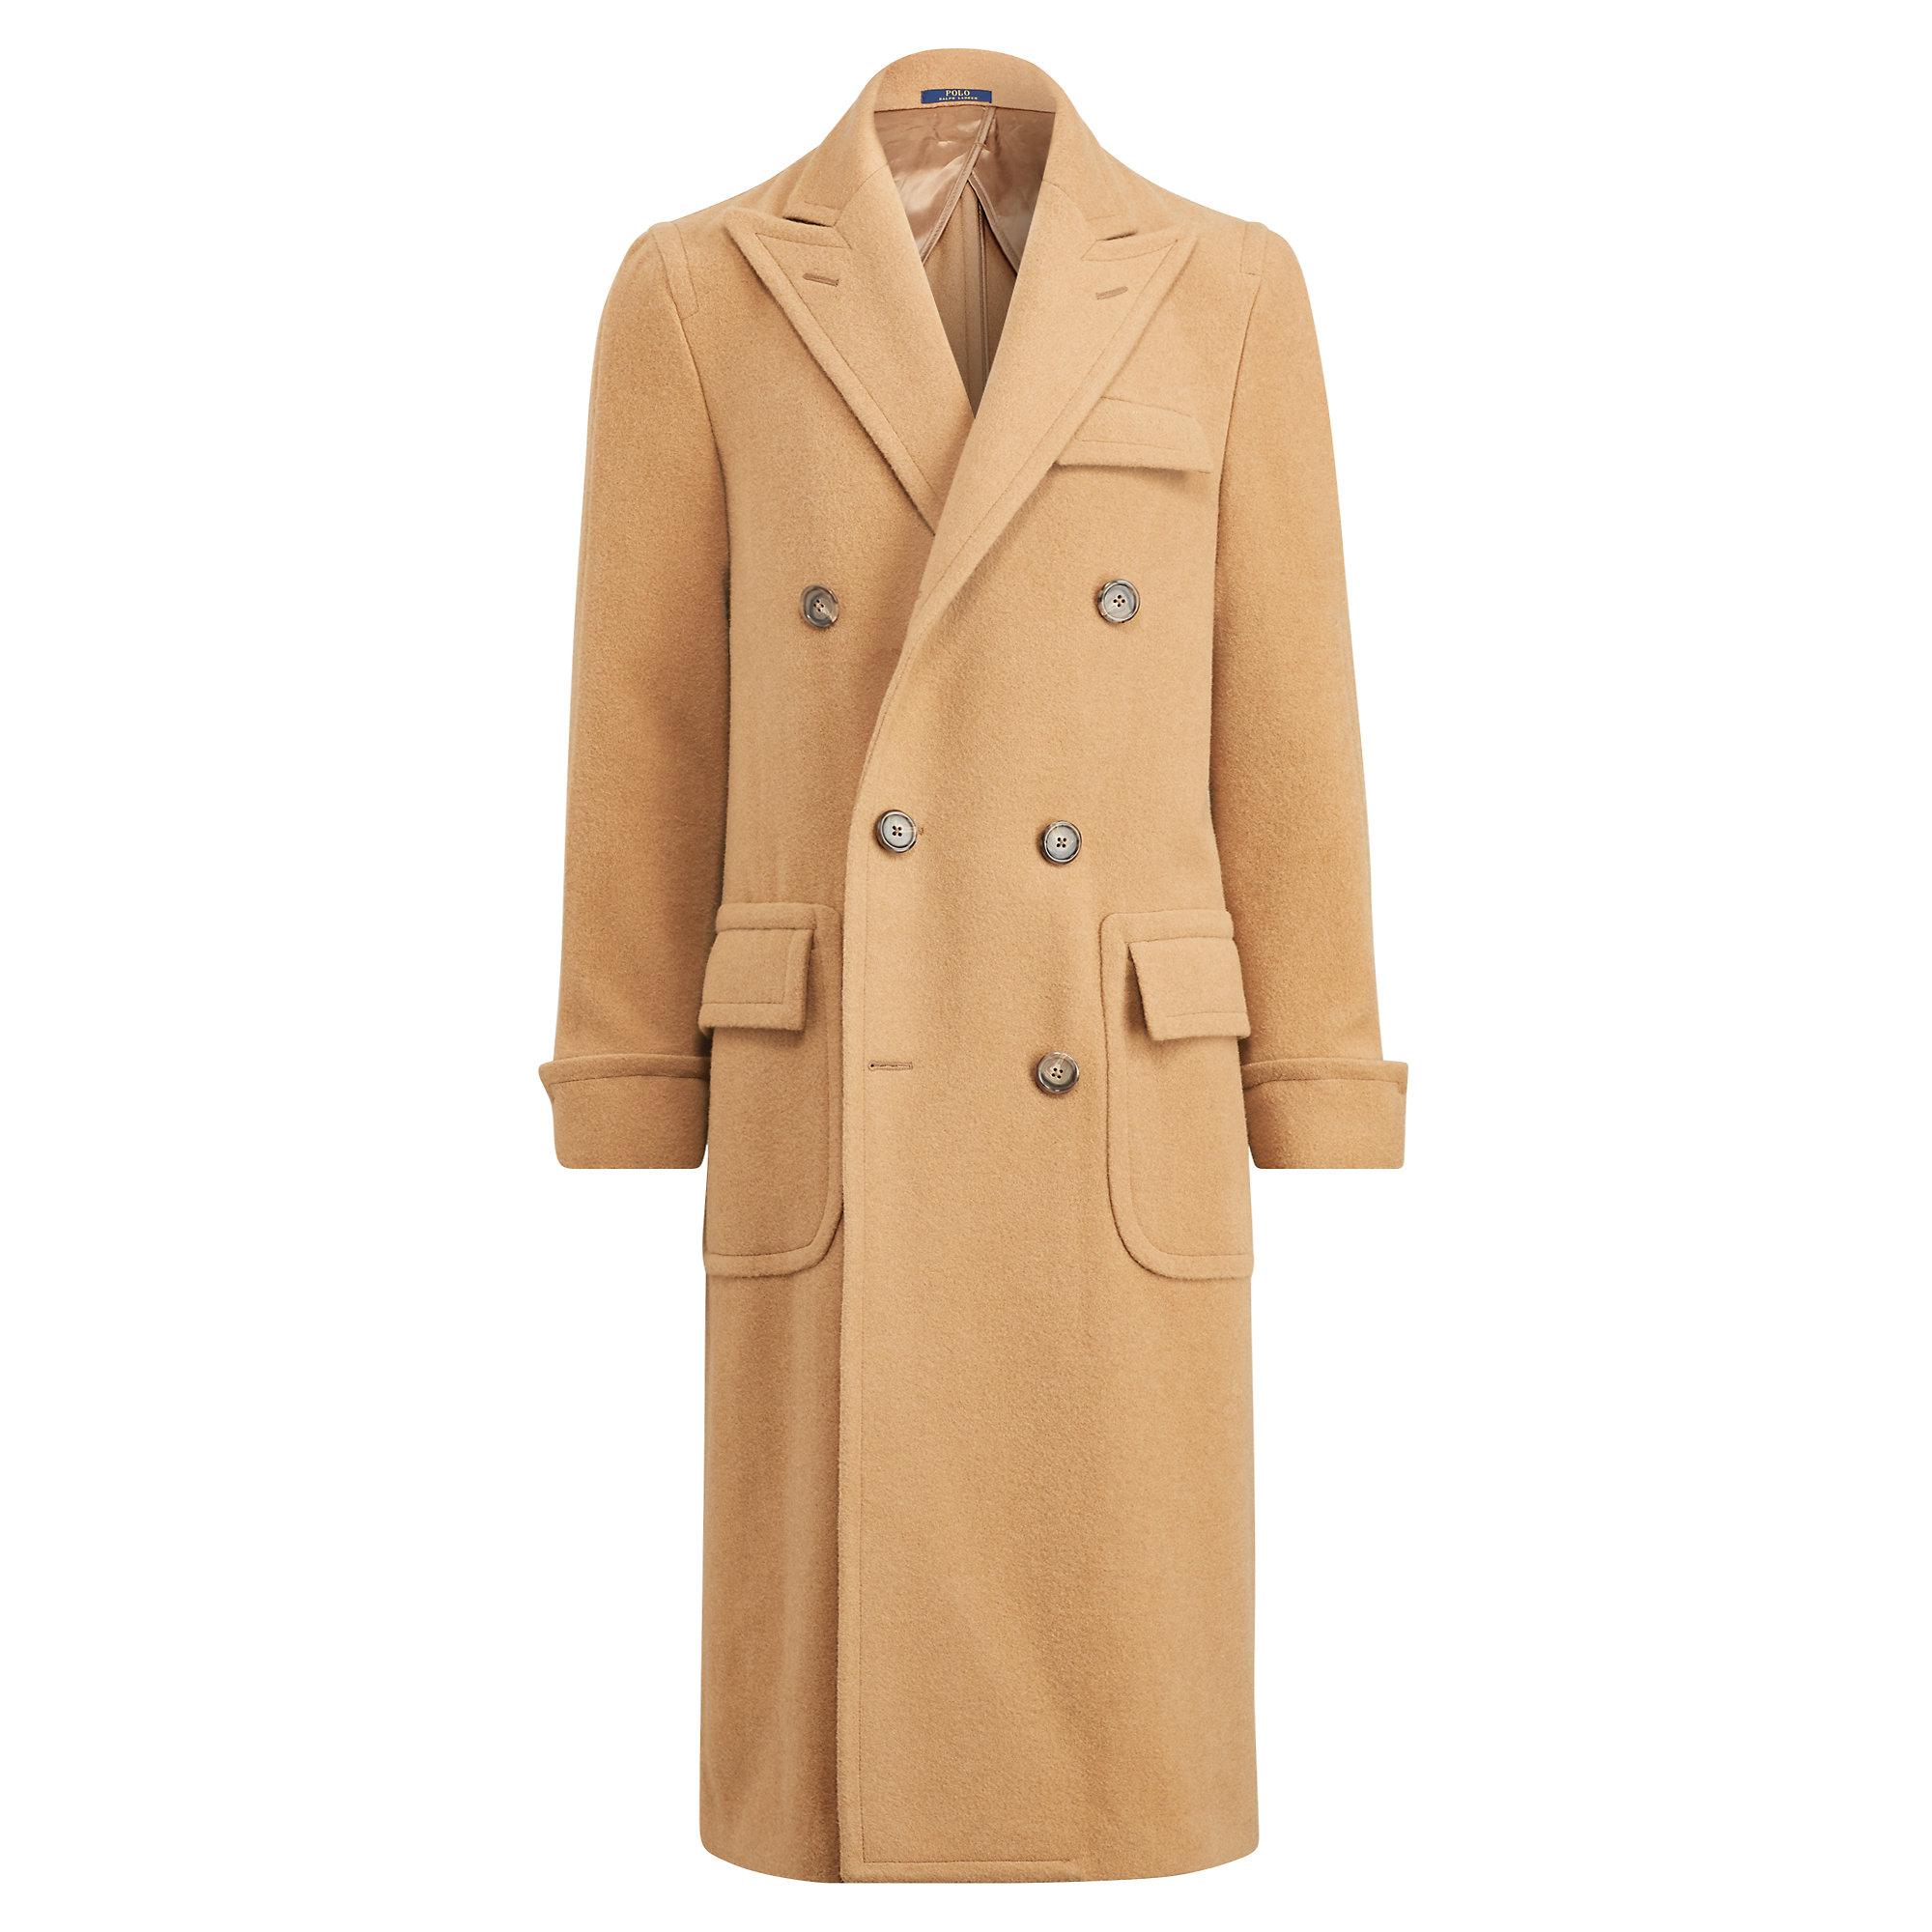 Lyst - Polo Ralph Lauren Polo Camel Hair Topcoat in Natural for Men